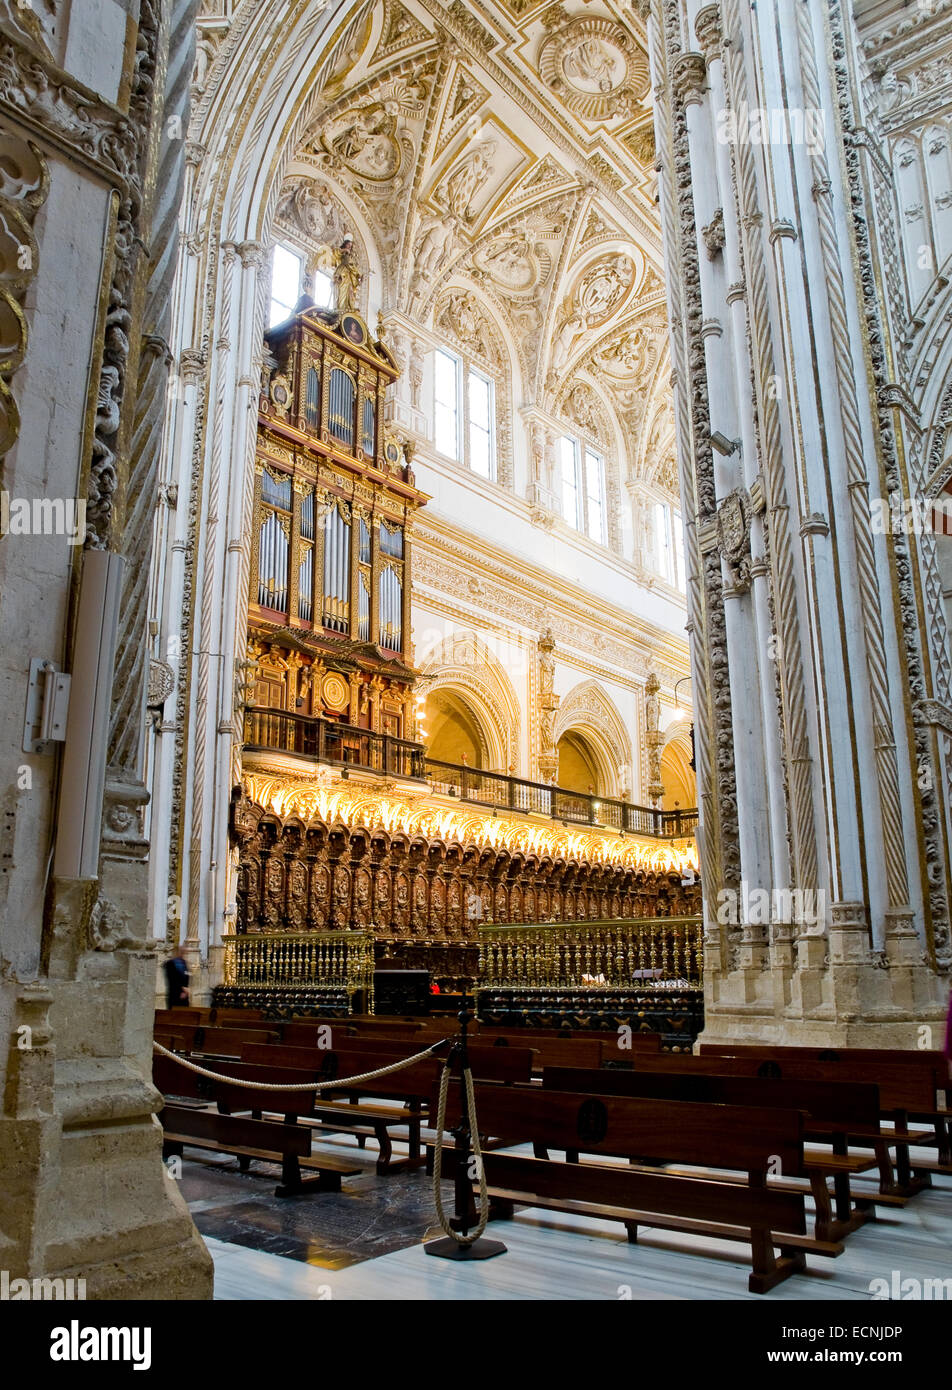 Aisle, nave and organ of Cathedral Mosque, Mezquita de Cordoba. Andalusia, Spain. Stock Photo